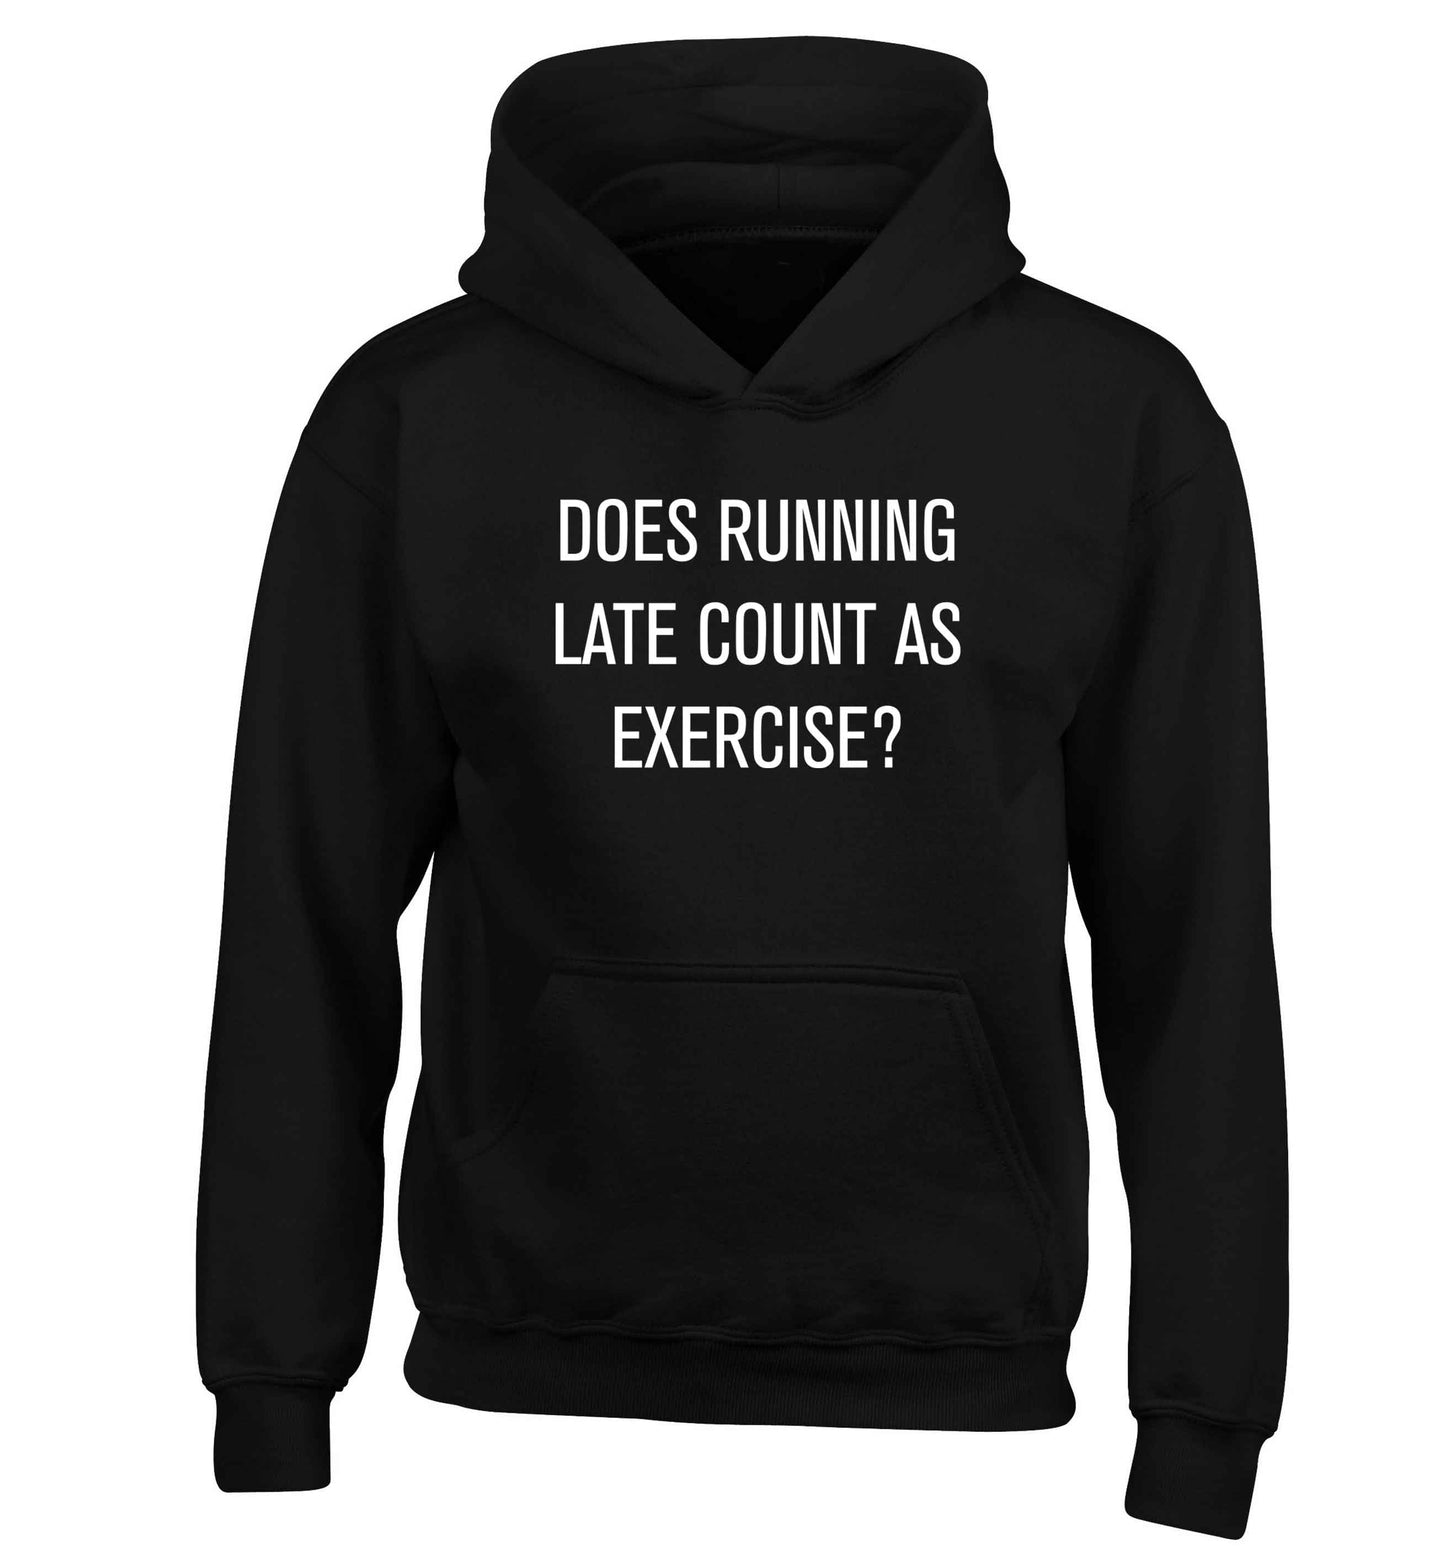 Does running late count as exercise? children's black hoodie 12-13 Years